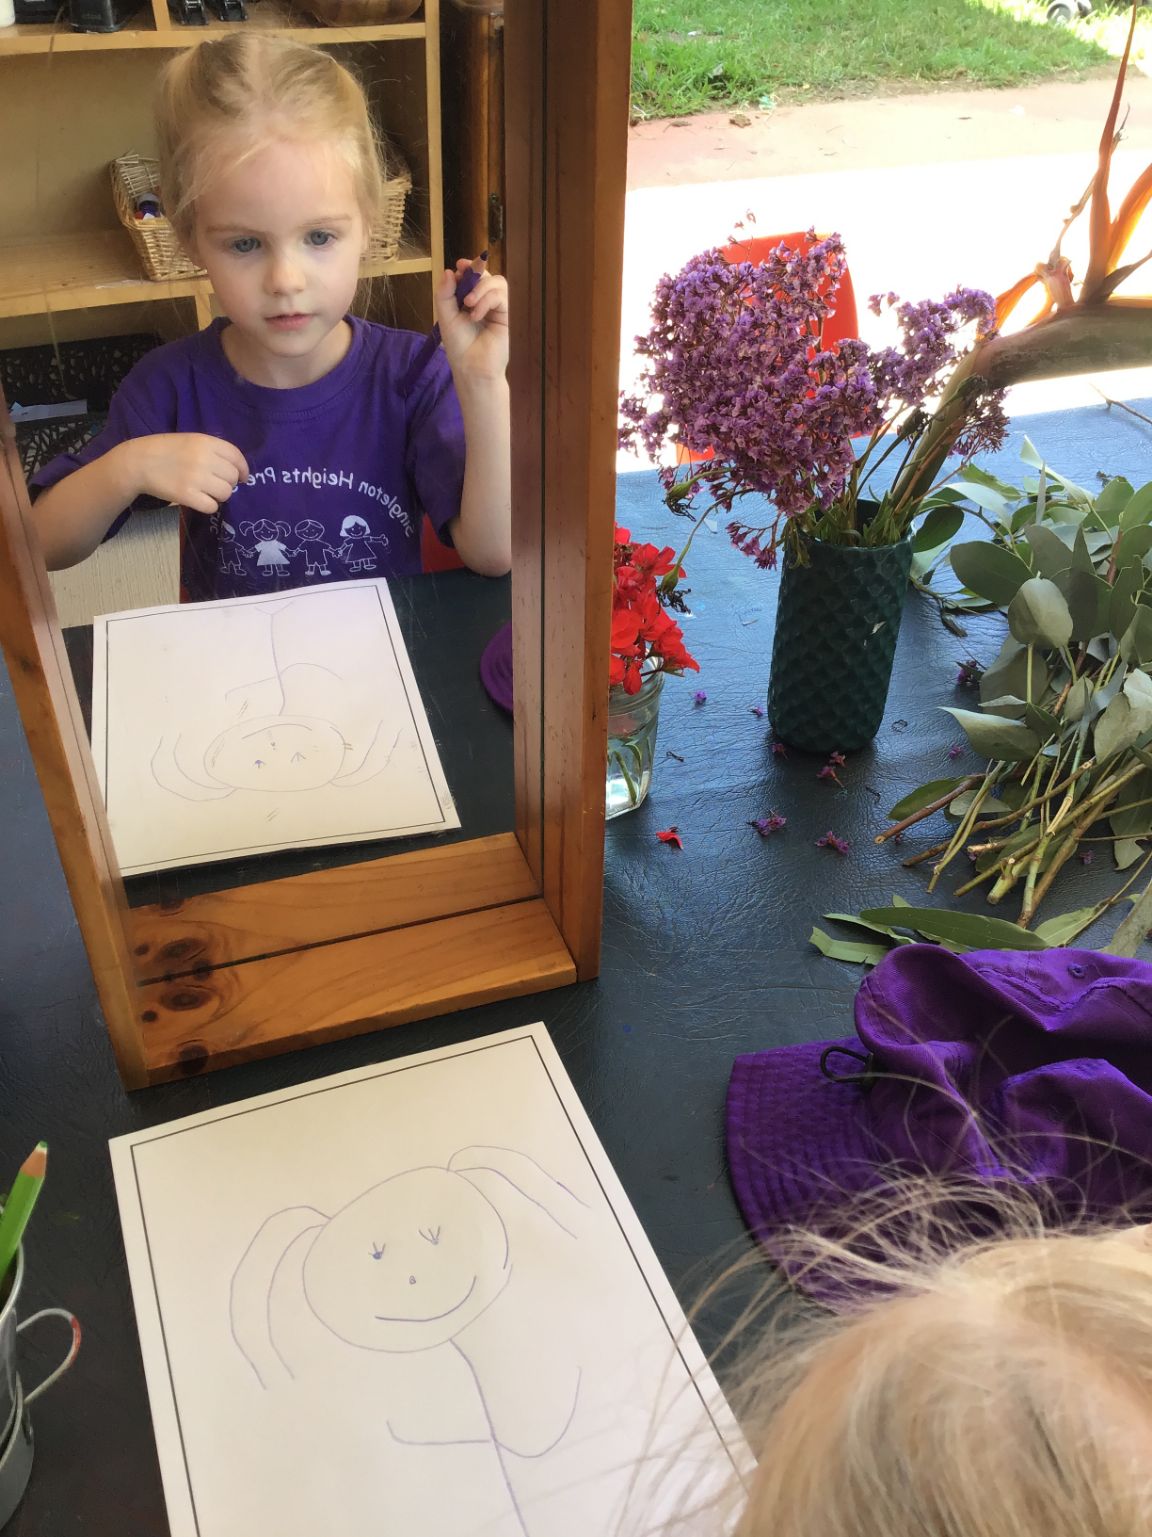 Child drawing a self-portrait in the mirror as part of the five learning outcomes that capture learning and development during early childhood.